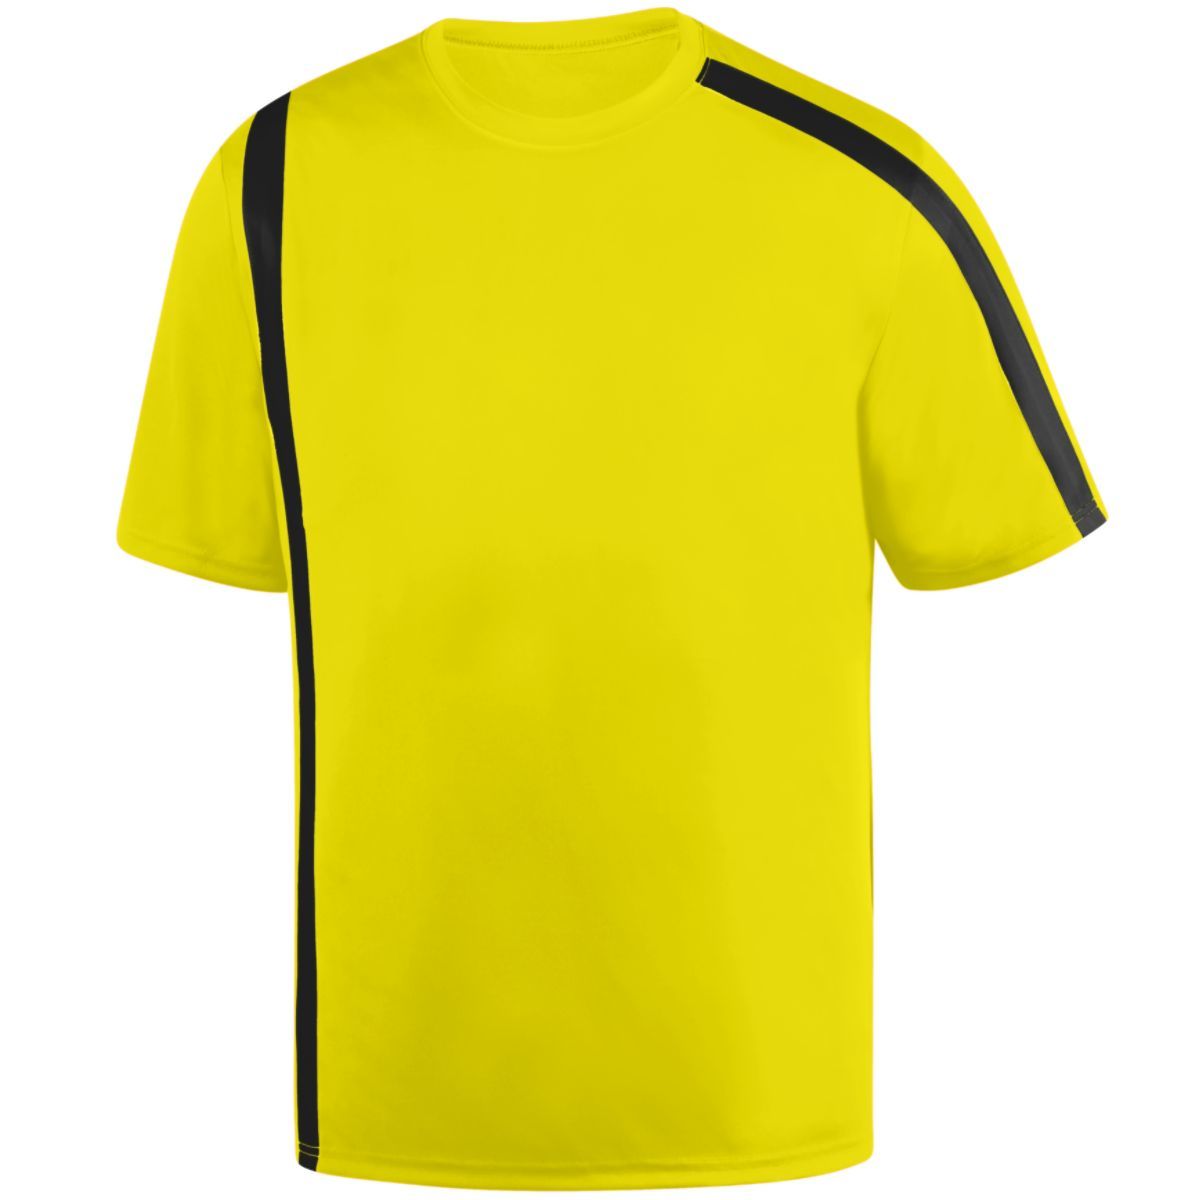 Augusta Sportswear Attacking Third Jersey in Power Yellow/Black  -Part of the Adult, Adult-Jersey, Augusta-Products, Soccer, Shirts, All-Sports-1 product lines at KanaleyCreations.com